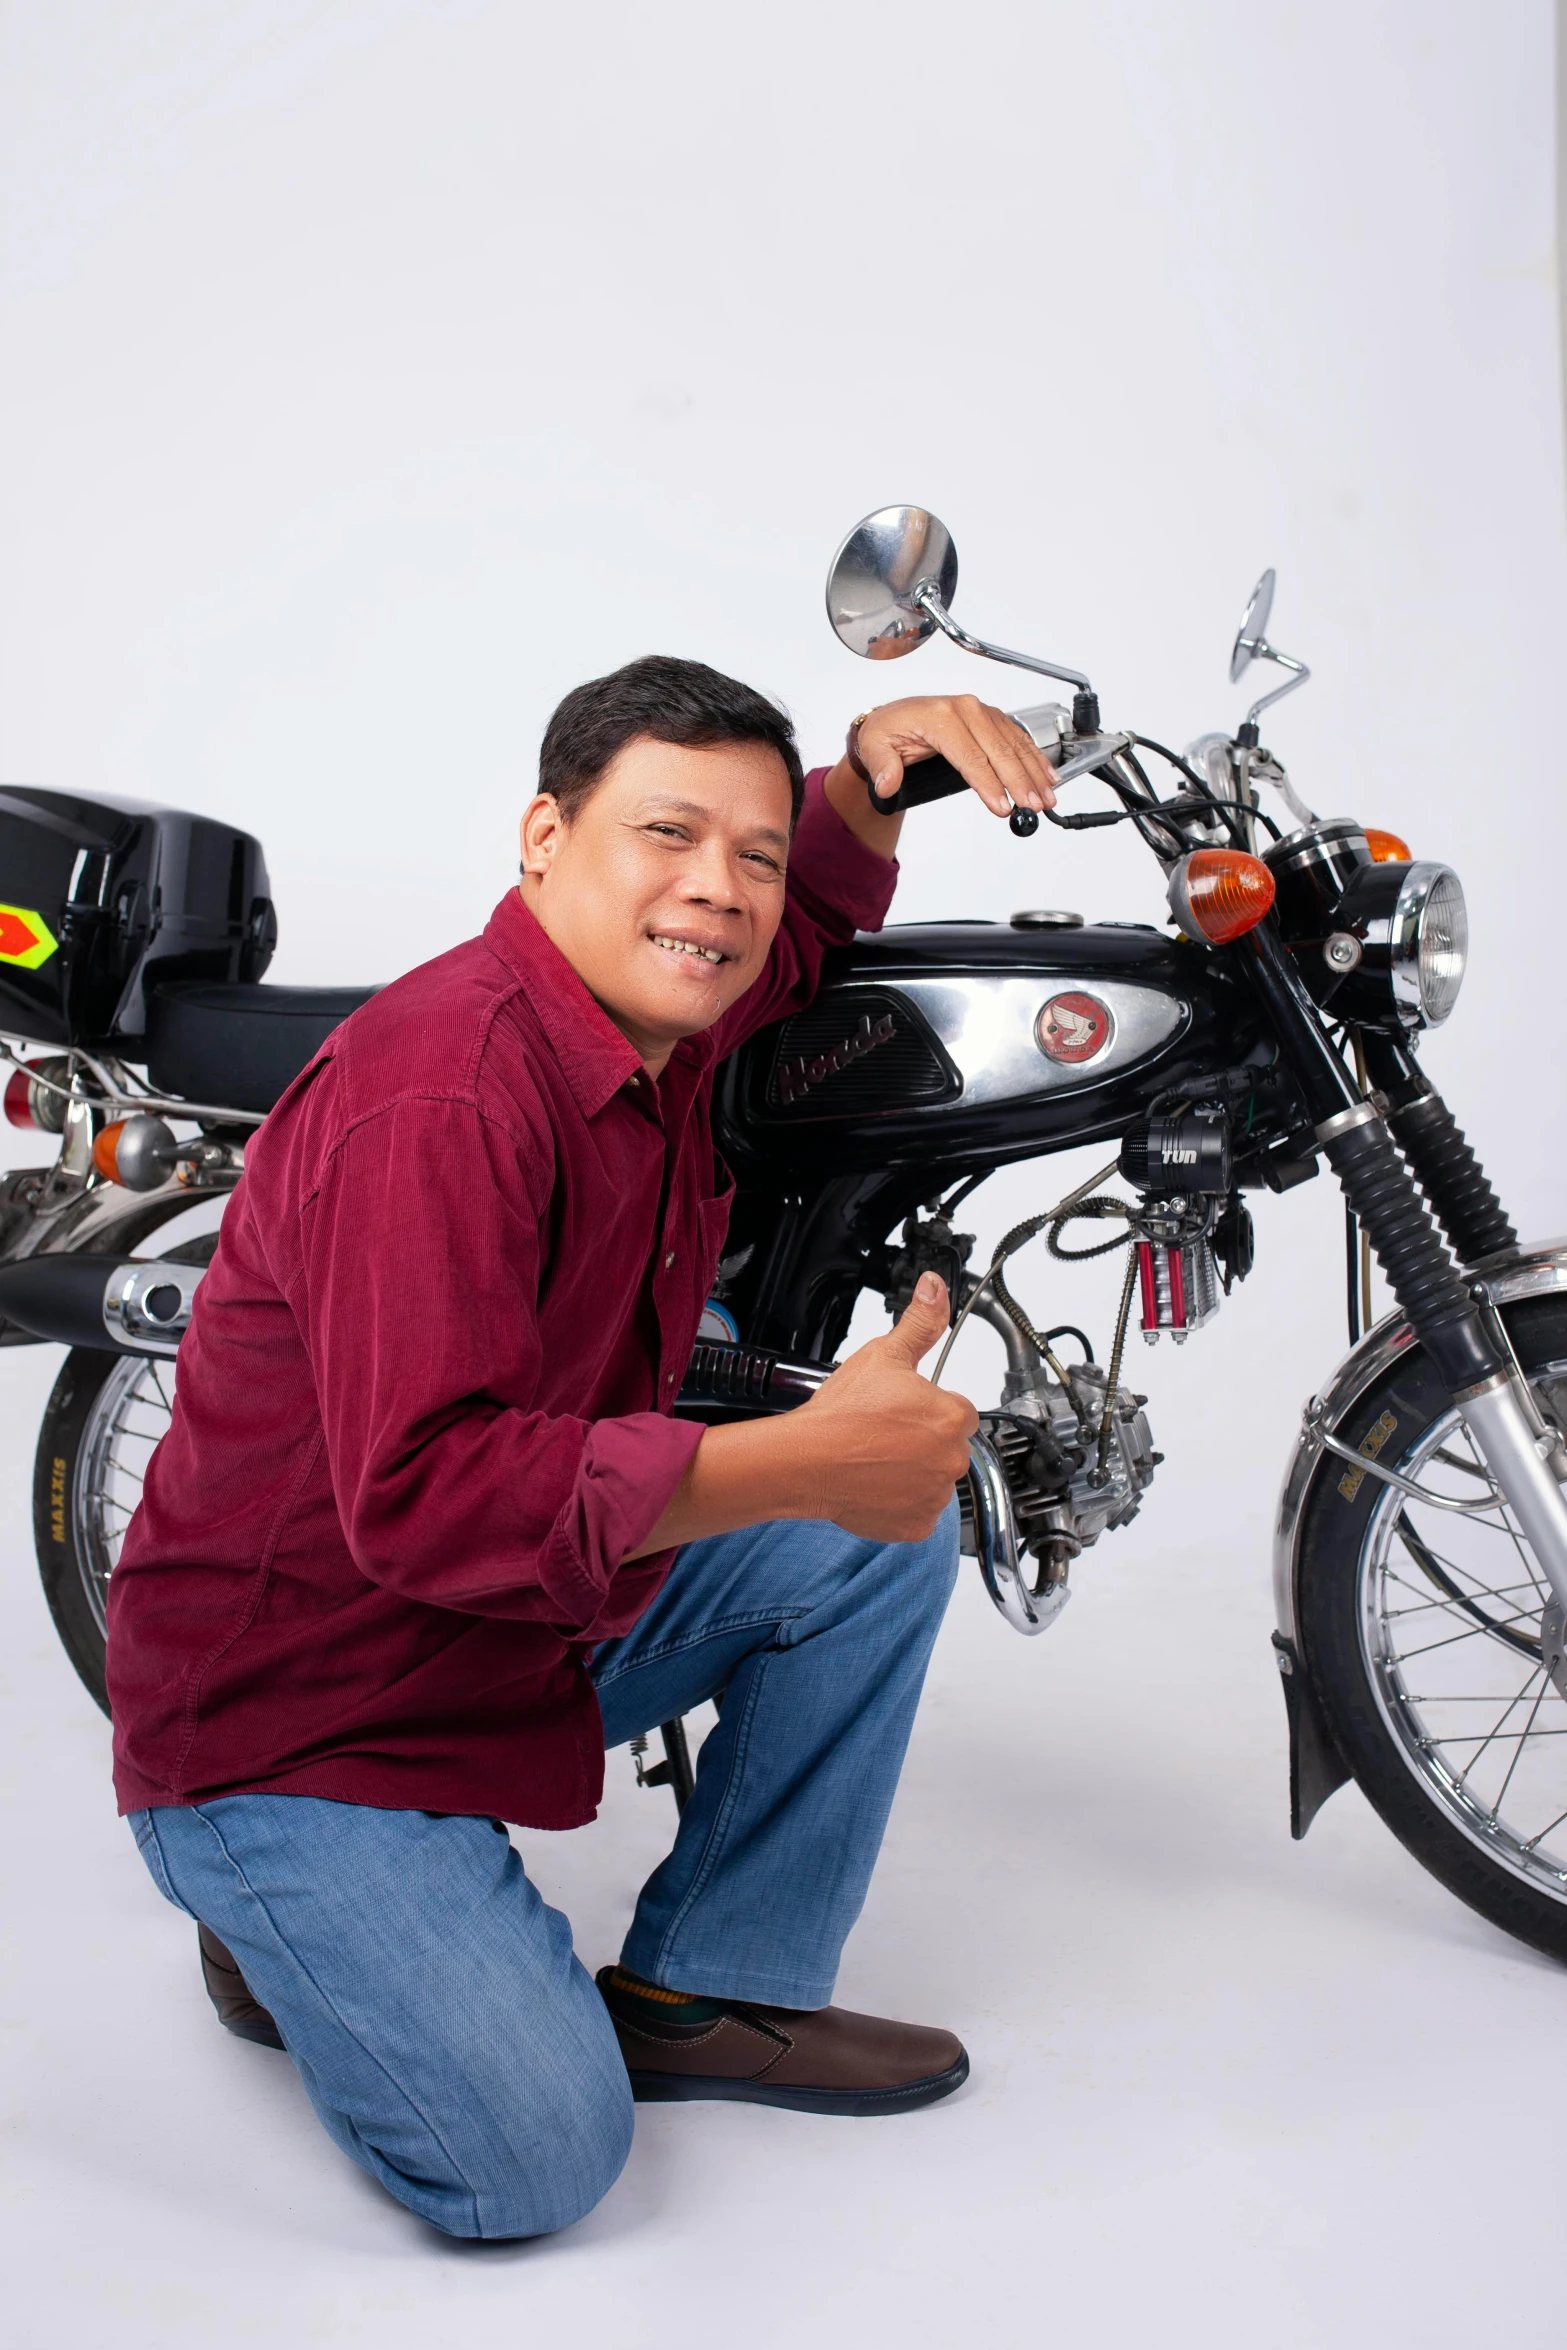 a man with a red shirt on kneeling next to a motorcycle